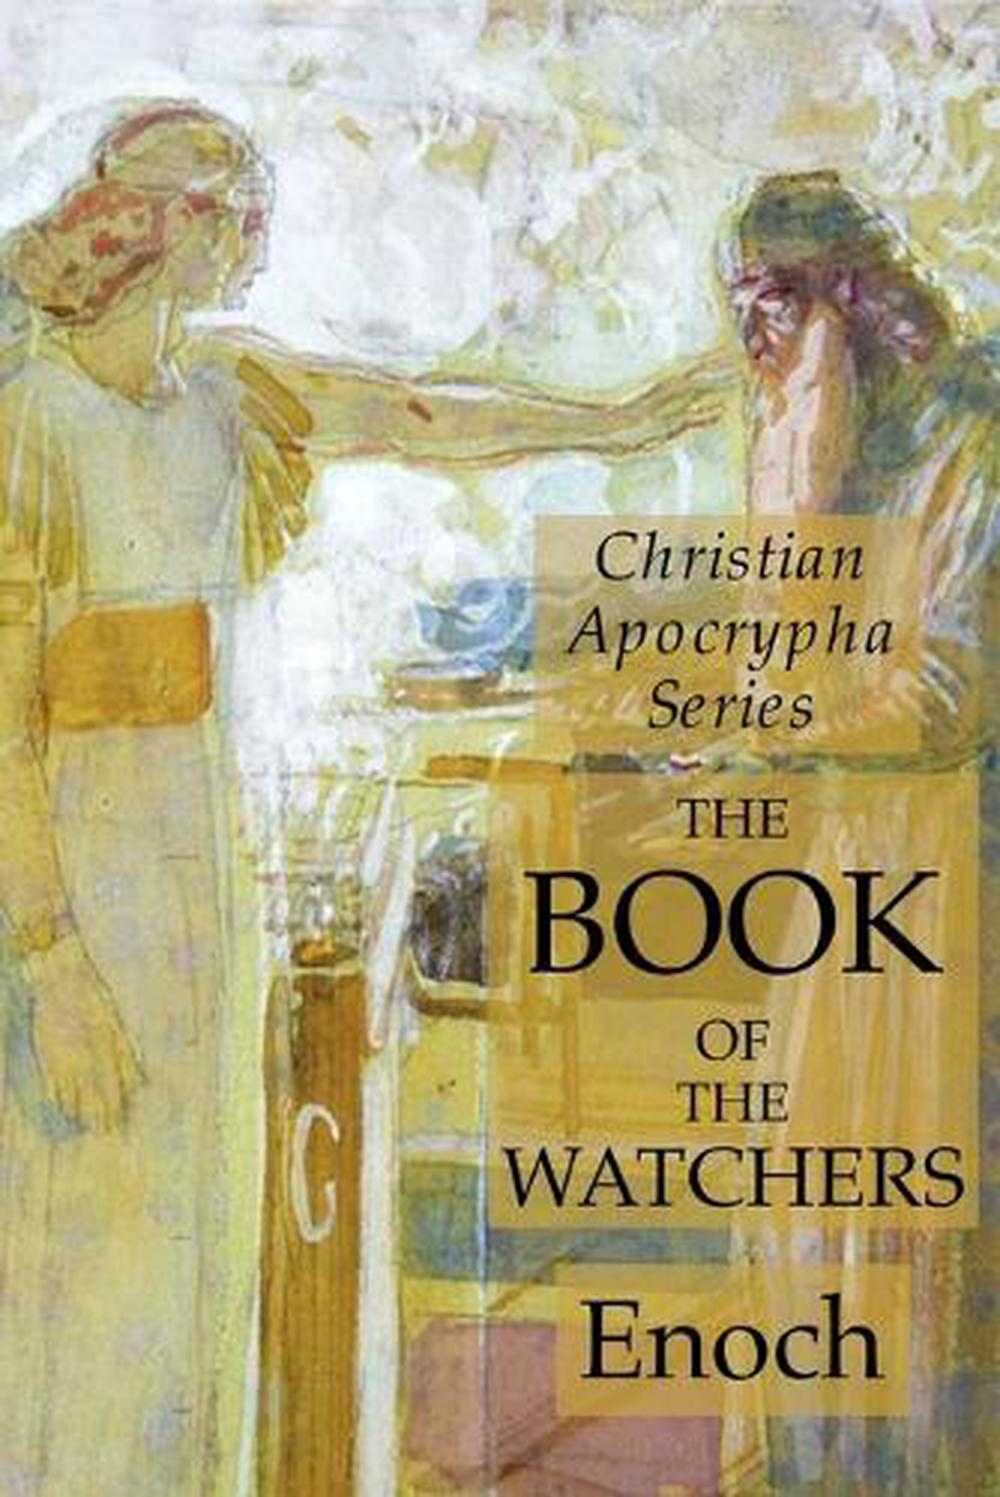 Book of the Watchers Christian Apocrypha Series by Enoch (English